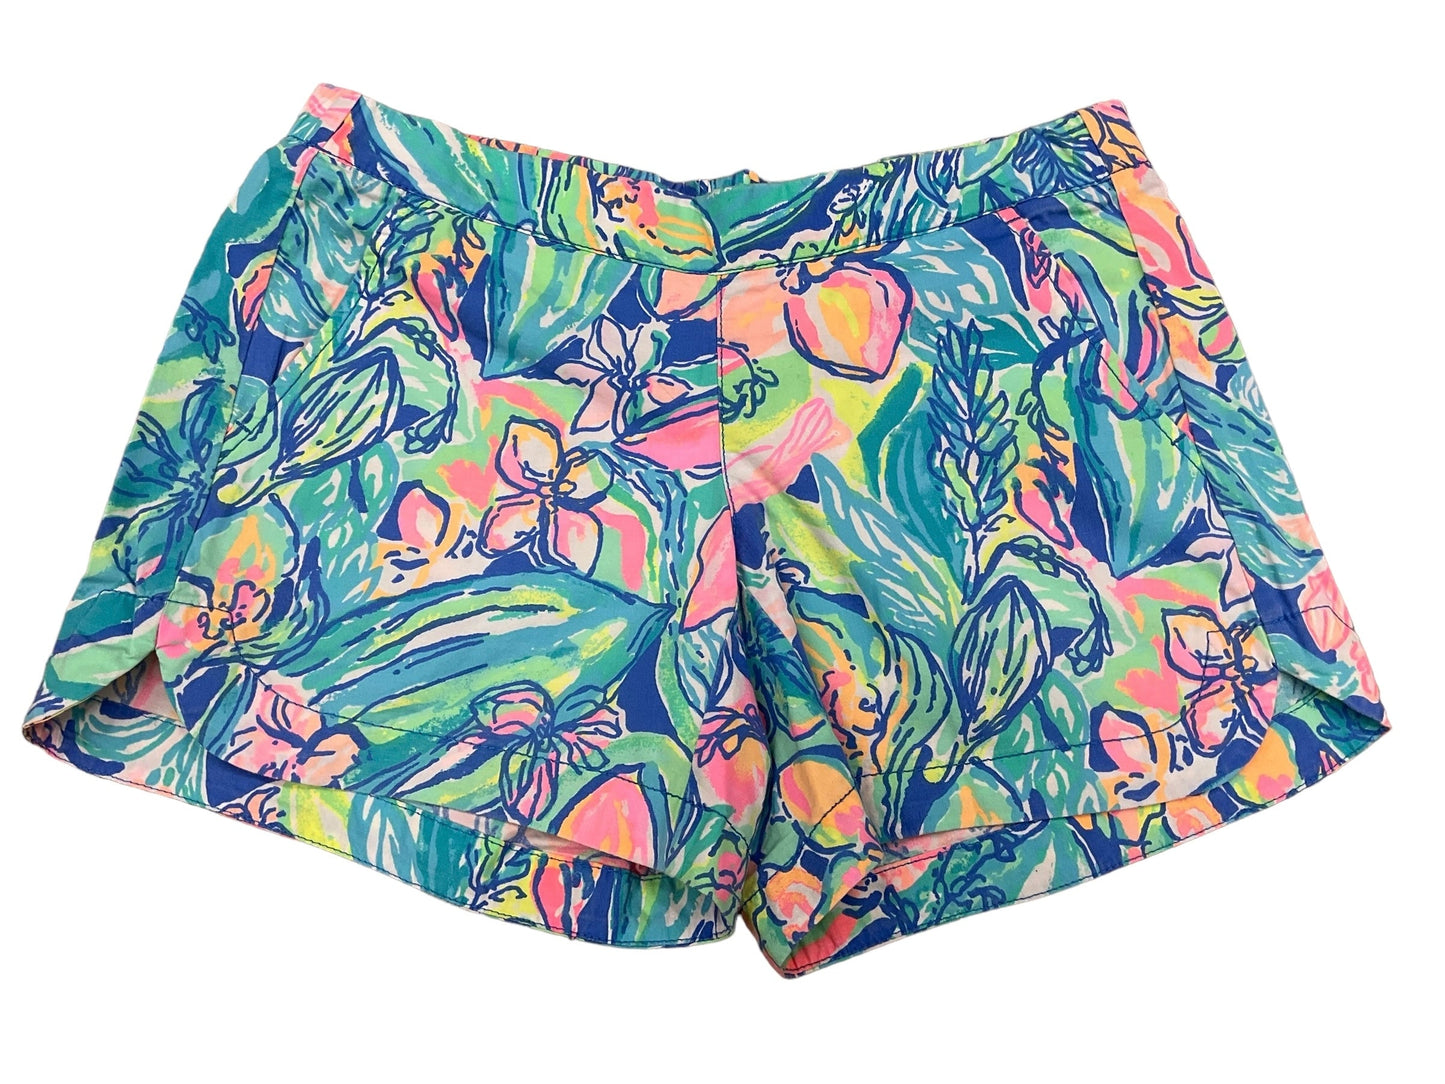 Teal Shorts Lilly Pulitzer, Size Xxs